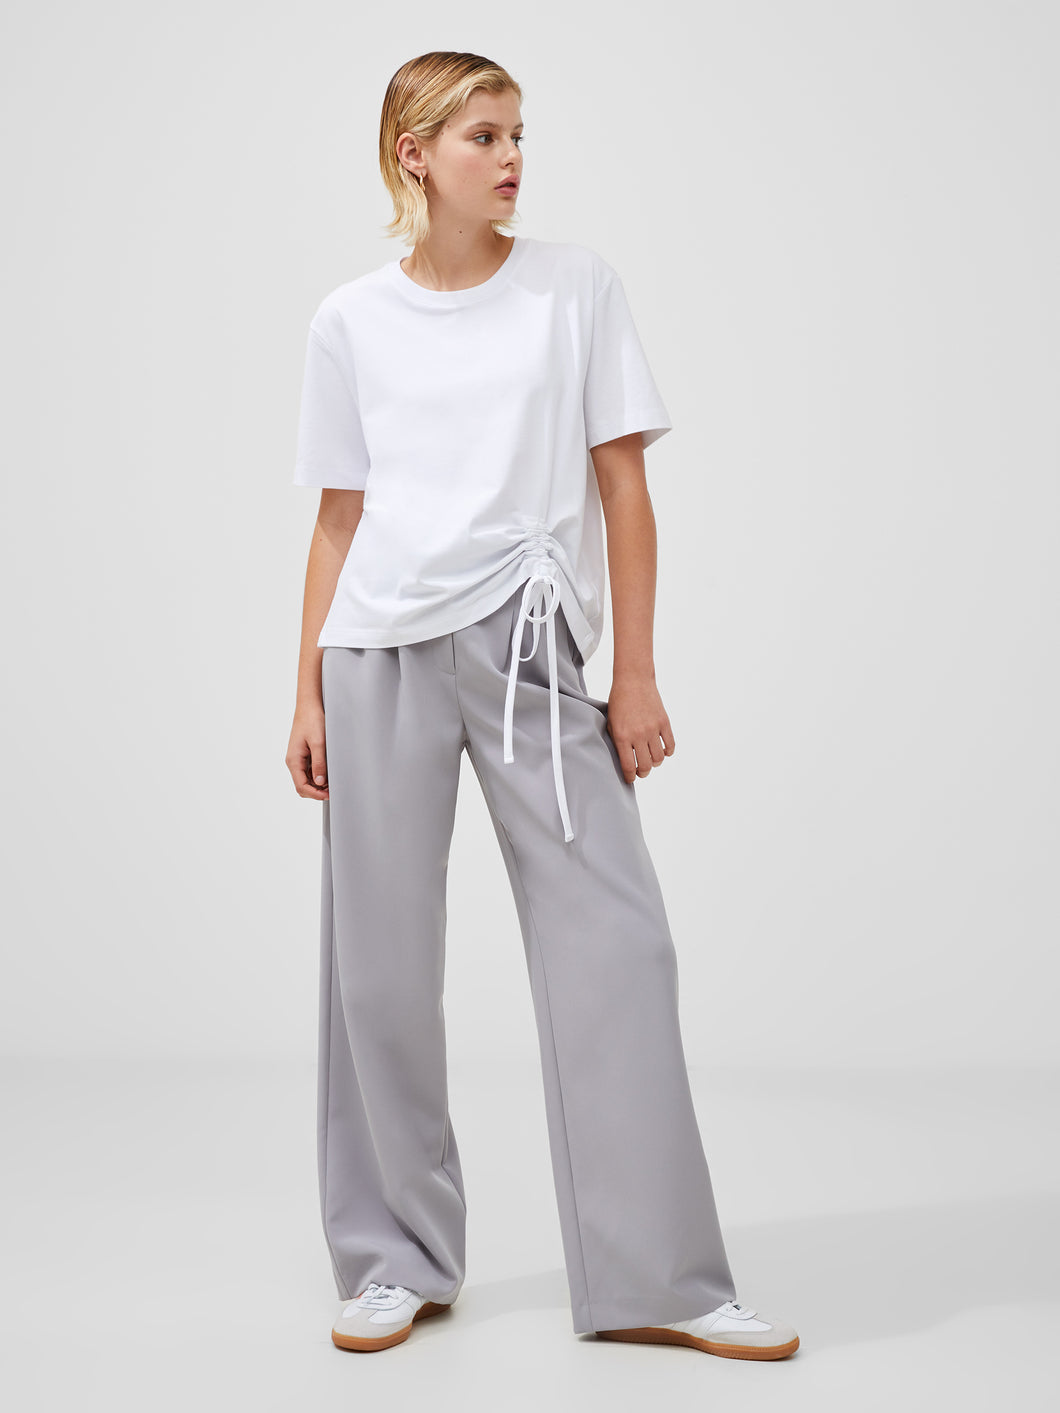 French Connection - Rallie Cotton Rouched T in White